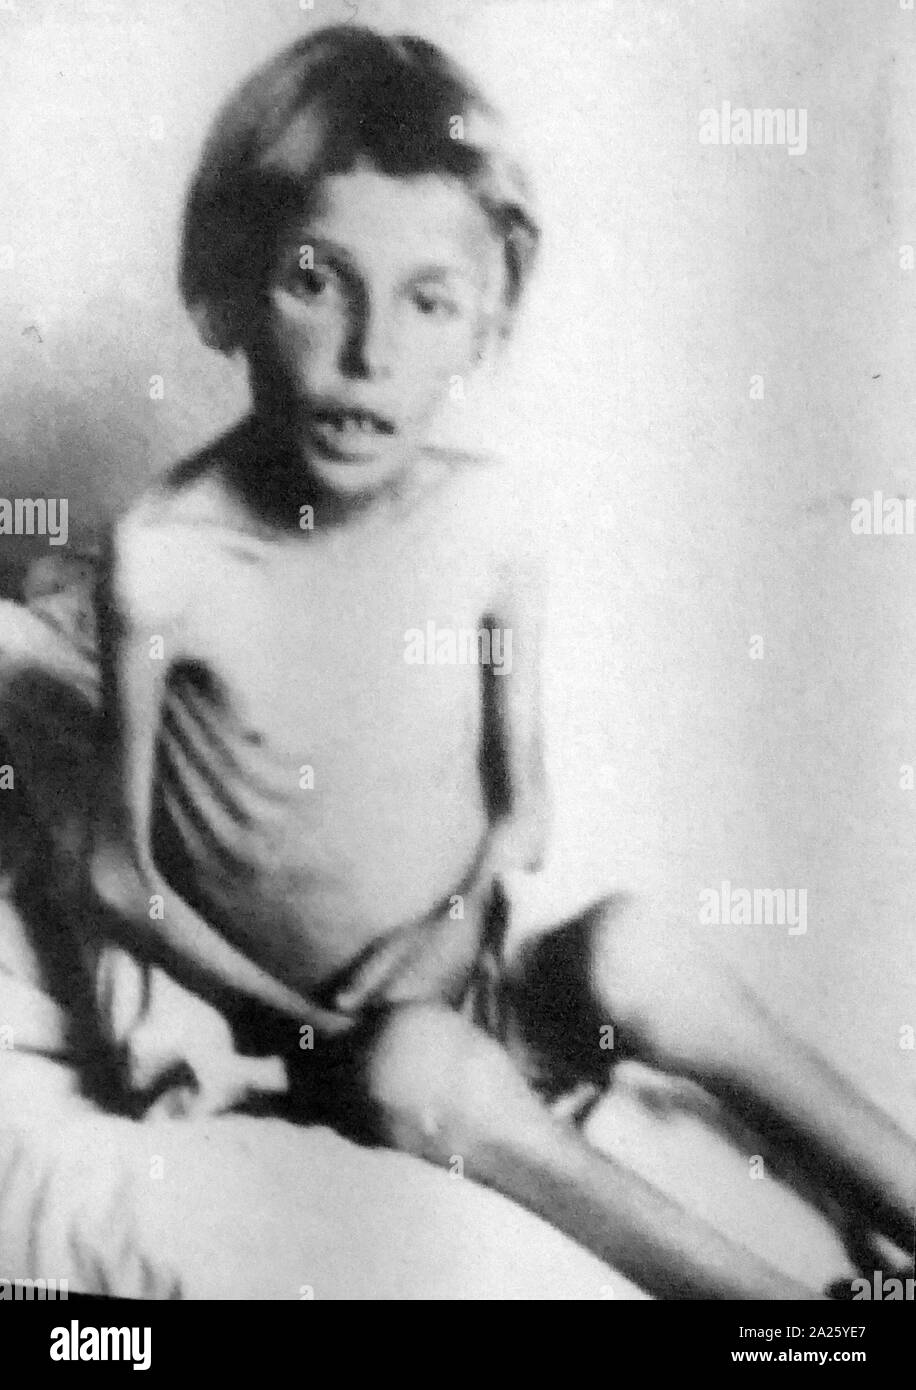 Photograph of a young emaciated Holocaust survivor. The Holocaust, also referred to as the Shoah, was a genocide during the Second World War in which some six million European Jews were murdered. Stock Photo